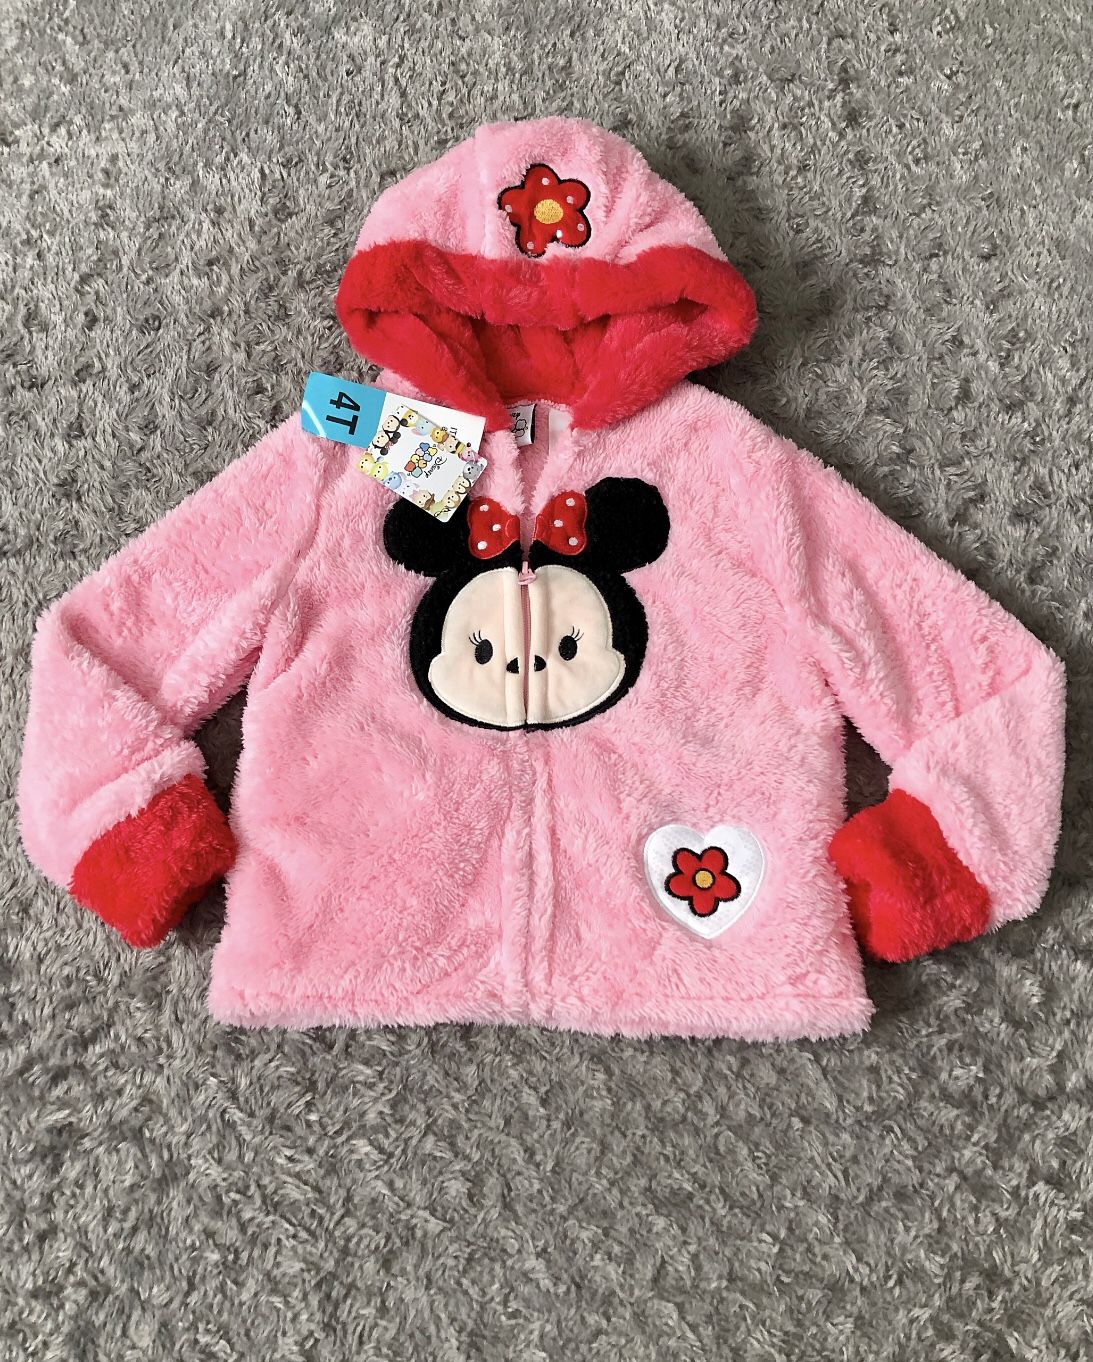 New! Girls Disney Tsum Minnie Fluffy Hoodie Paid $36 size 4T Brand new! Pink Tsum Girl Hoodie/Jacket. Super cute embroidered Minnie Mouse Character o